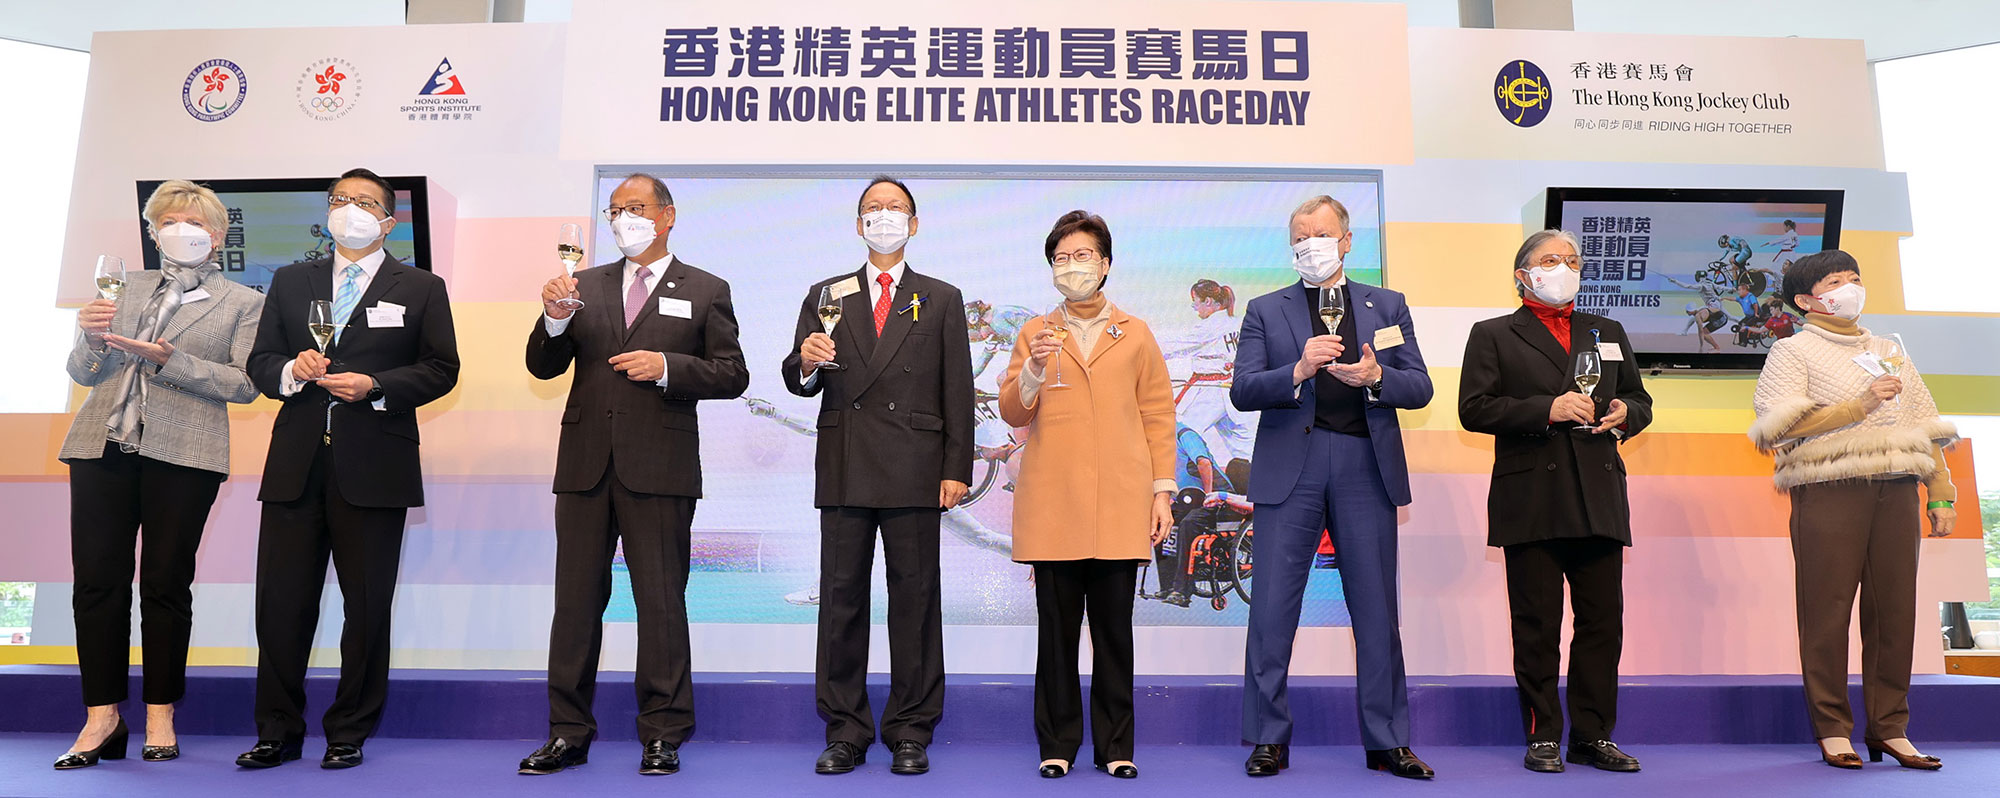 Officiating at the Hong Kong Elite Athletes Raceday were HKSAR Chief Executive Carrie Lam (4th right), Acting Secretary for Home Affairs Jack Chan (2nd left), Club Chairman Philip Chen (4th left), Club Chief Executive Officer Winfried Engelbrecht-Bresges (3rd right), Chairman of the HKSI Dr Lam Tai-fai (3rd left), President of the Sports Federation & Olympic Committee of Hong Kong, China Timothy Fok (2nd right), President of the Hong Kong Paralympic Committee & Sports Association for the Physically Disabled Jenny Fung (1st right), and Chief Executive of the HKSI Dr Trisha Leahy (1st left).